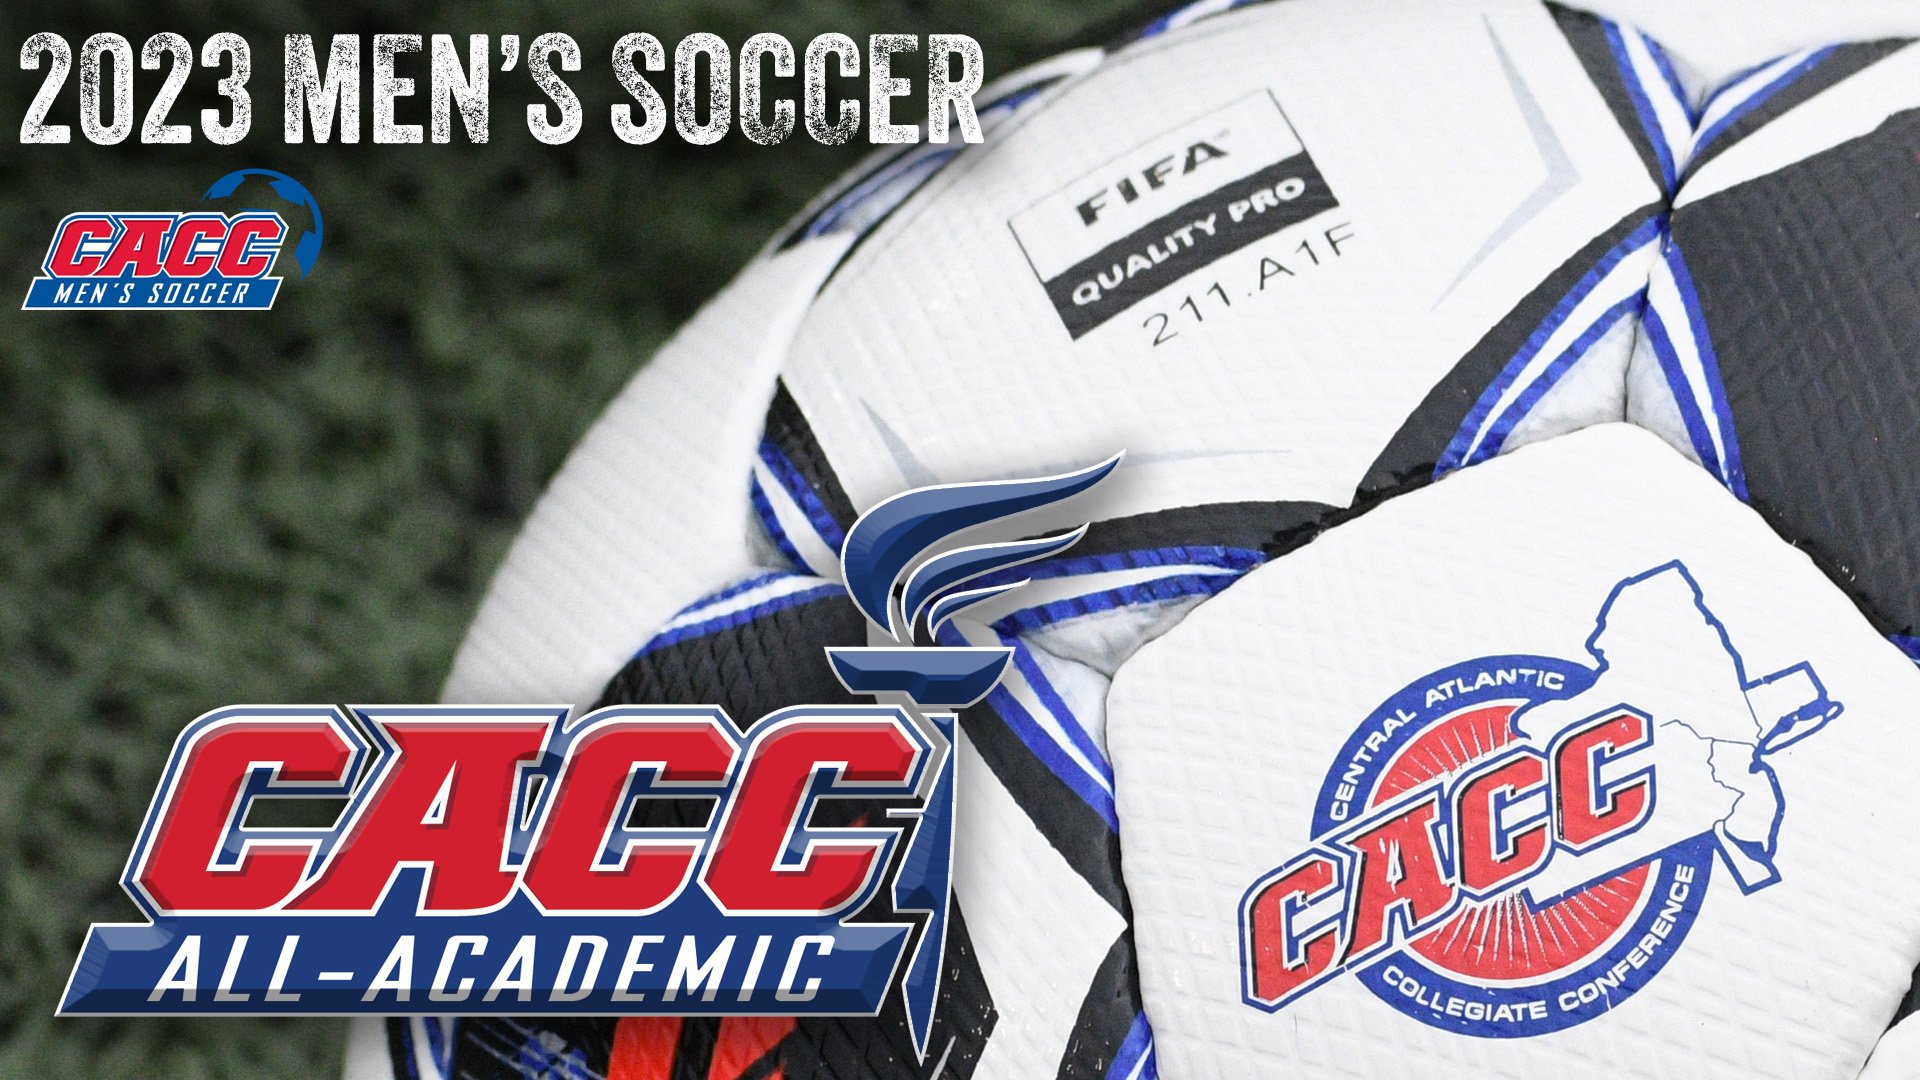 81 S-As Named to 2023 CACC MSOC All-Academic Team